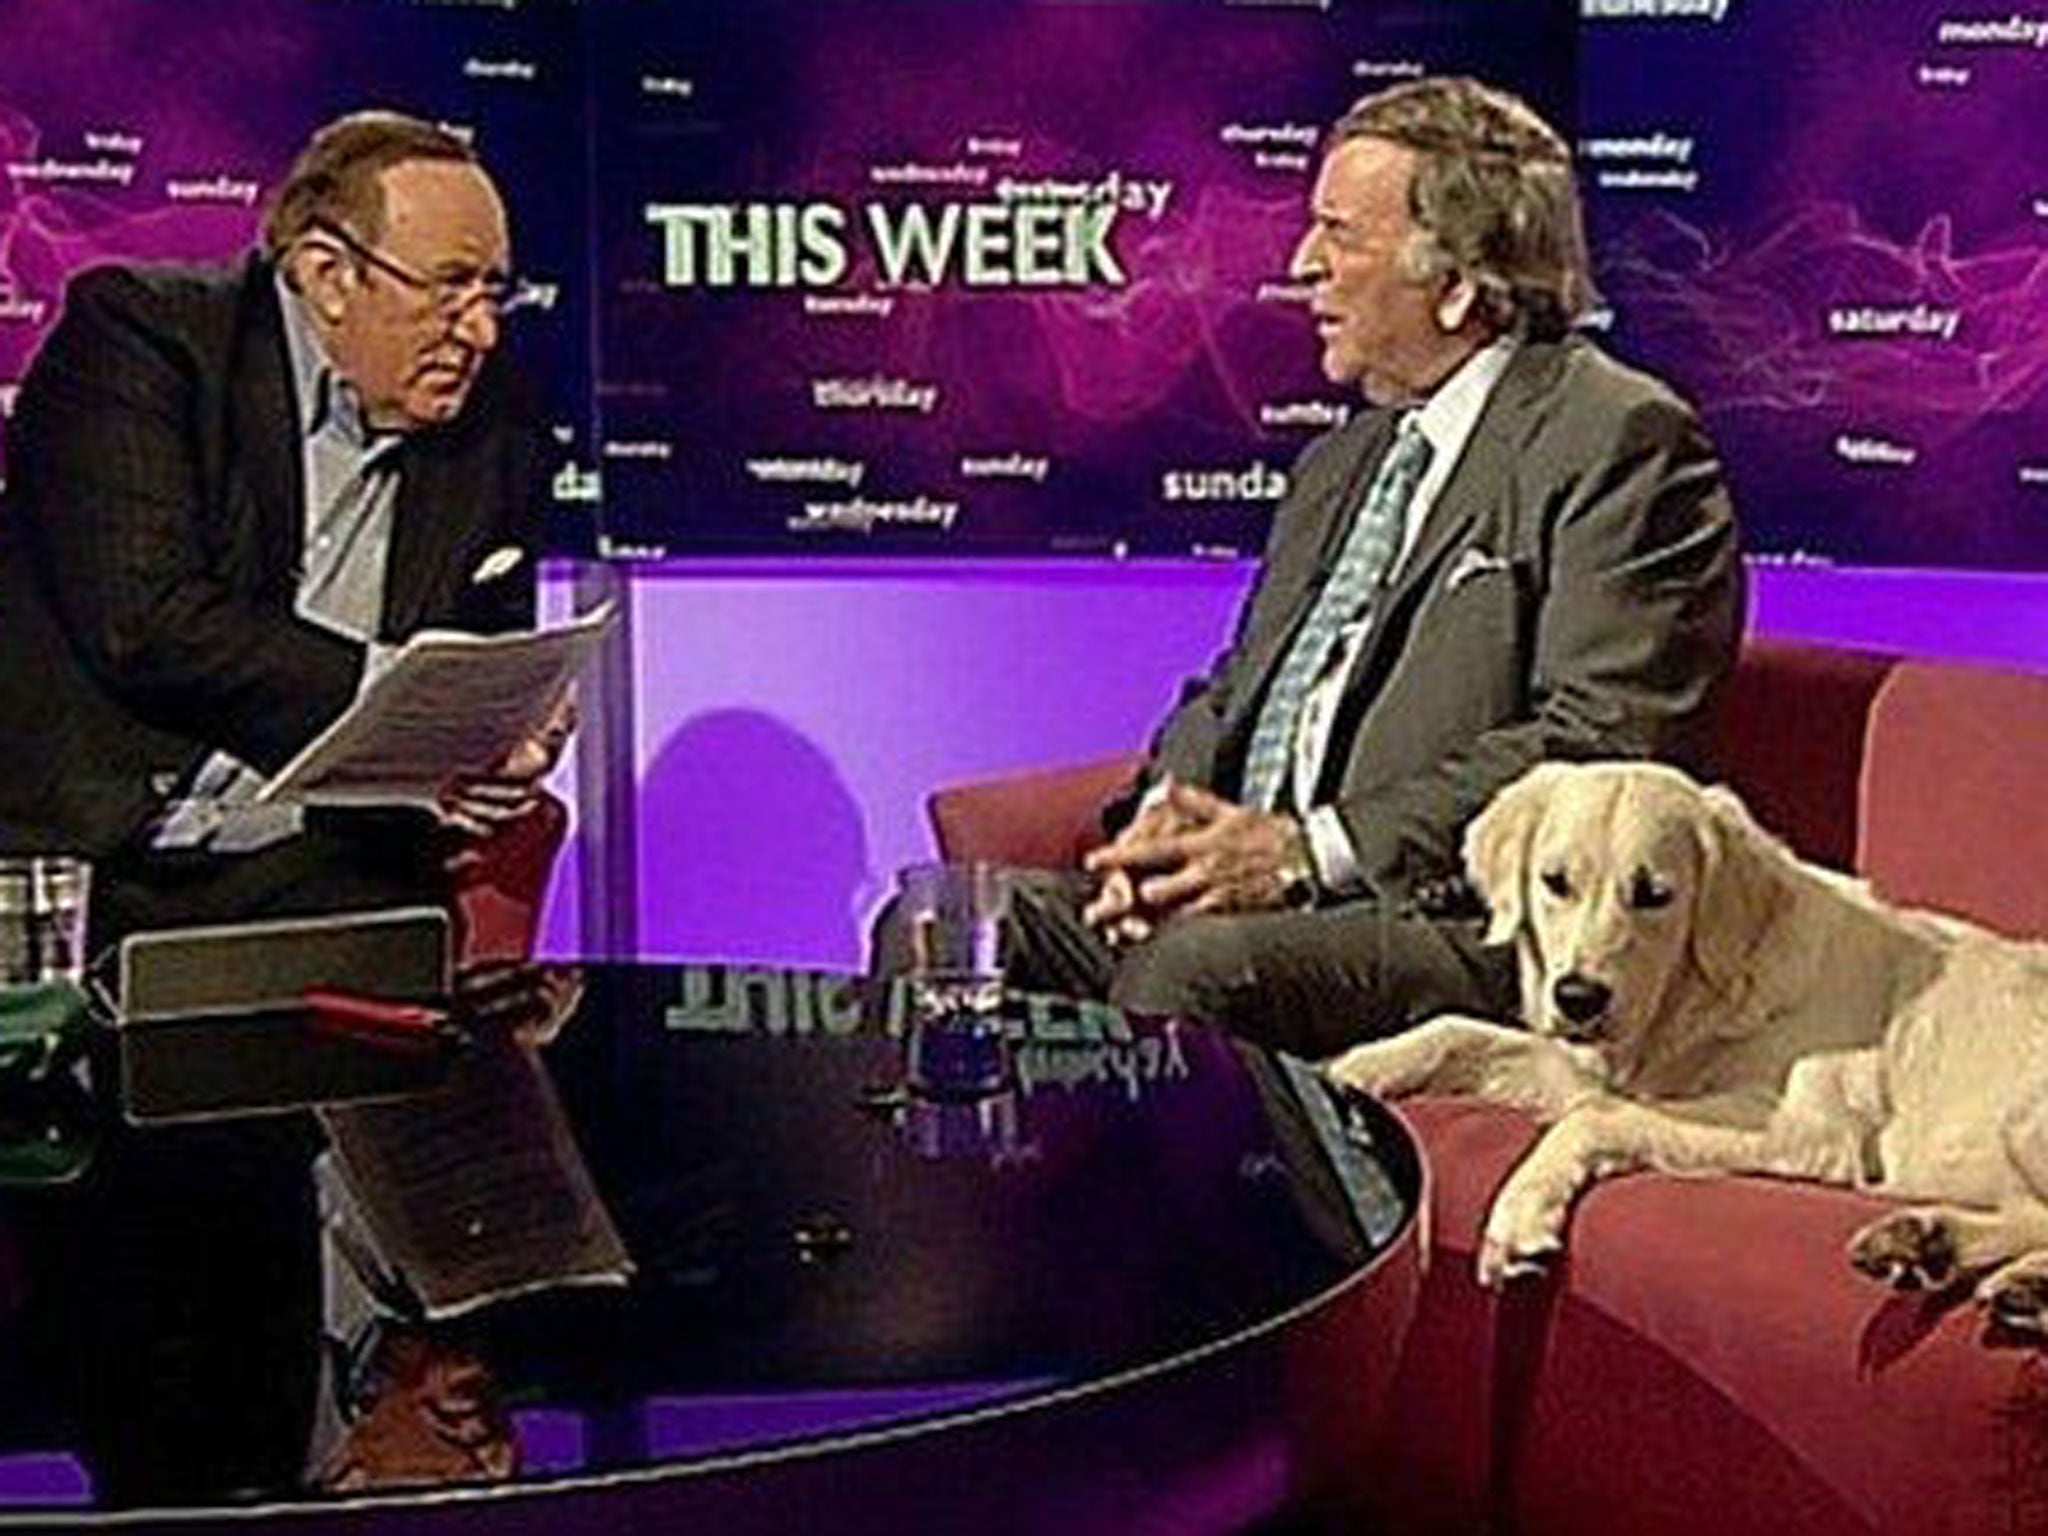 The latest star of the BBC is a golden retriever called Miss Molly